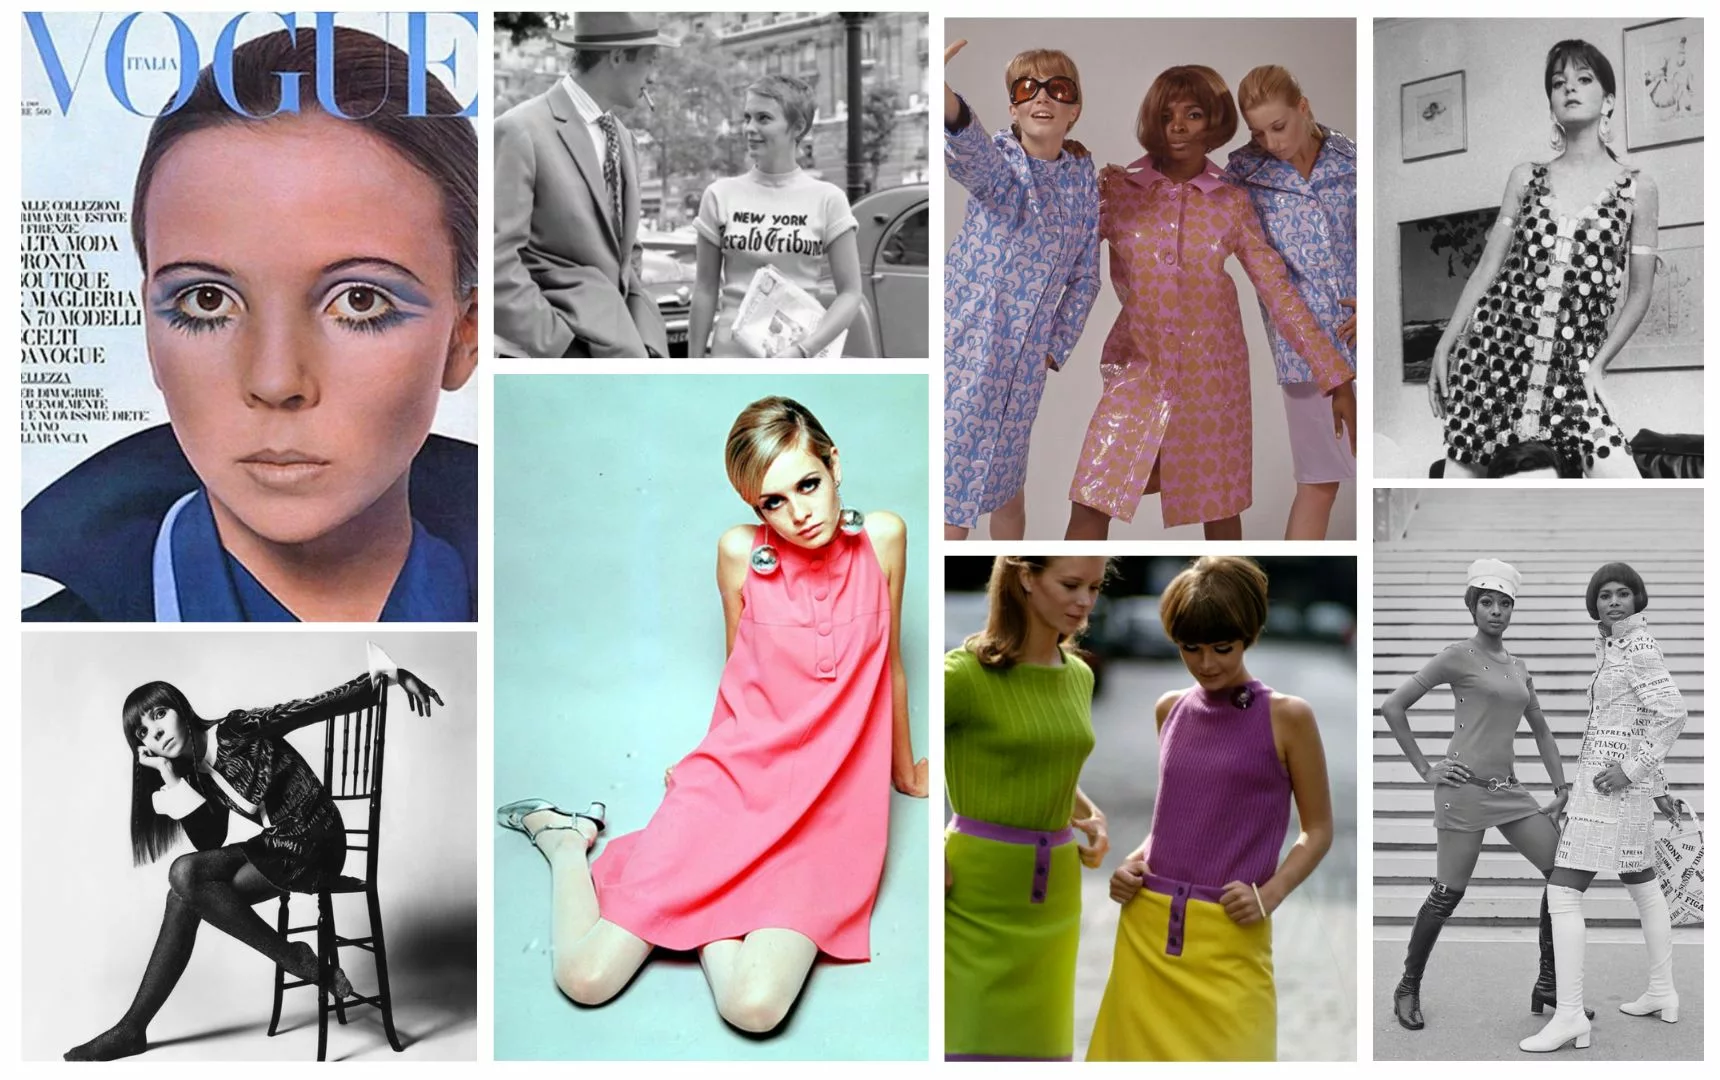 Fashion Inspired by '60s Space-Age Chic